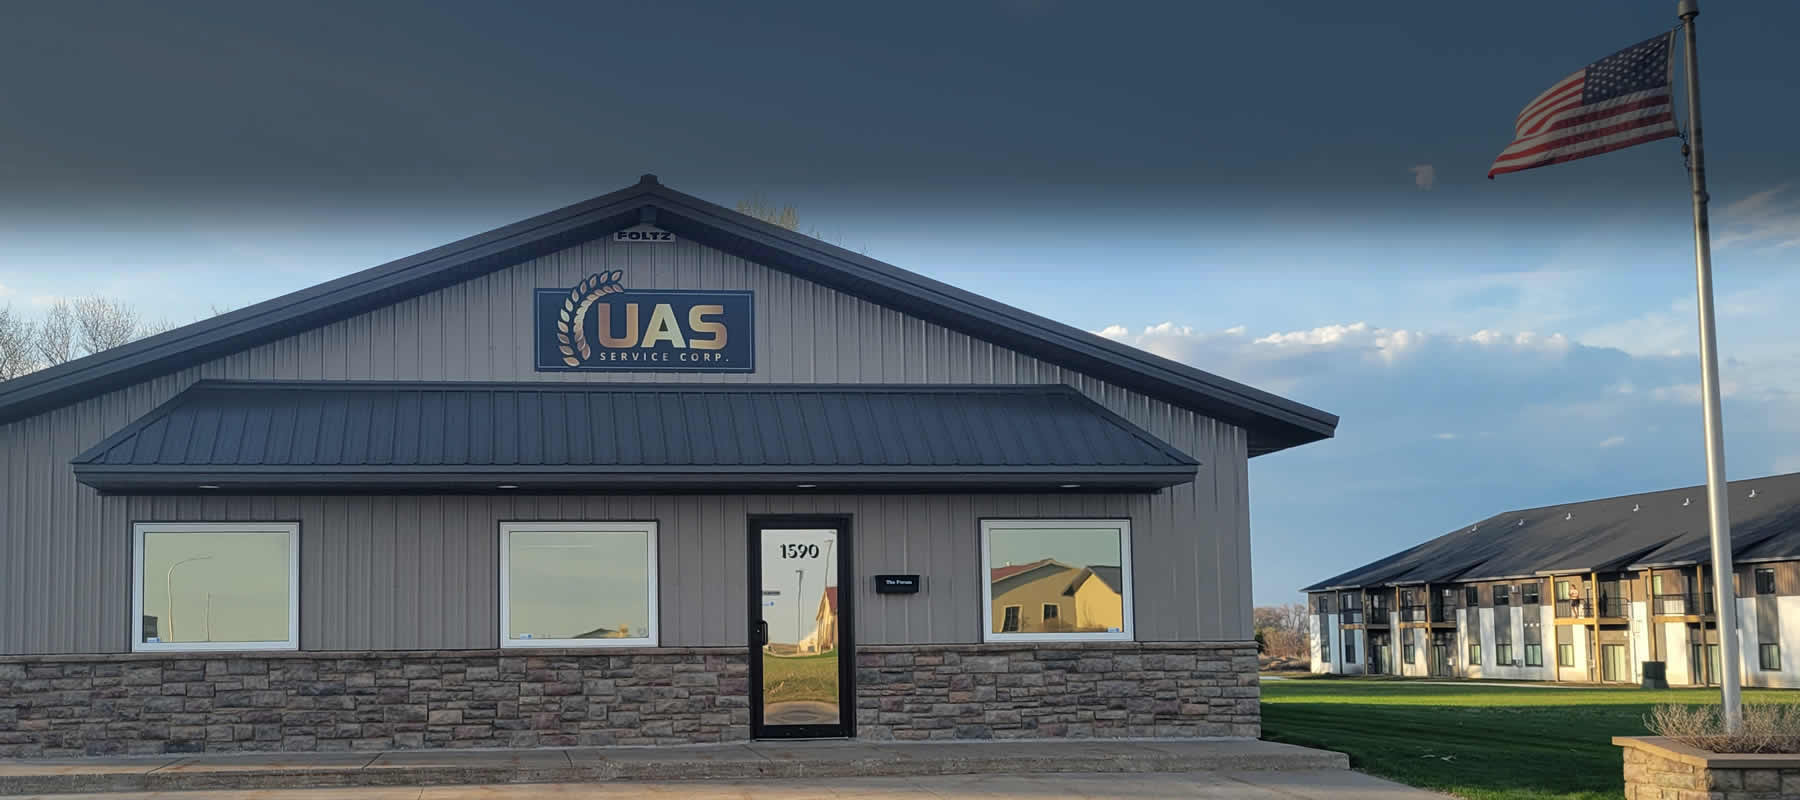 Purchase a DICKEY-john GAC 2500-INTL from UAS Service Corp.